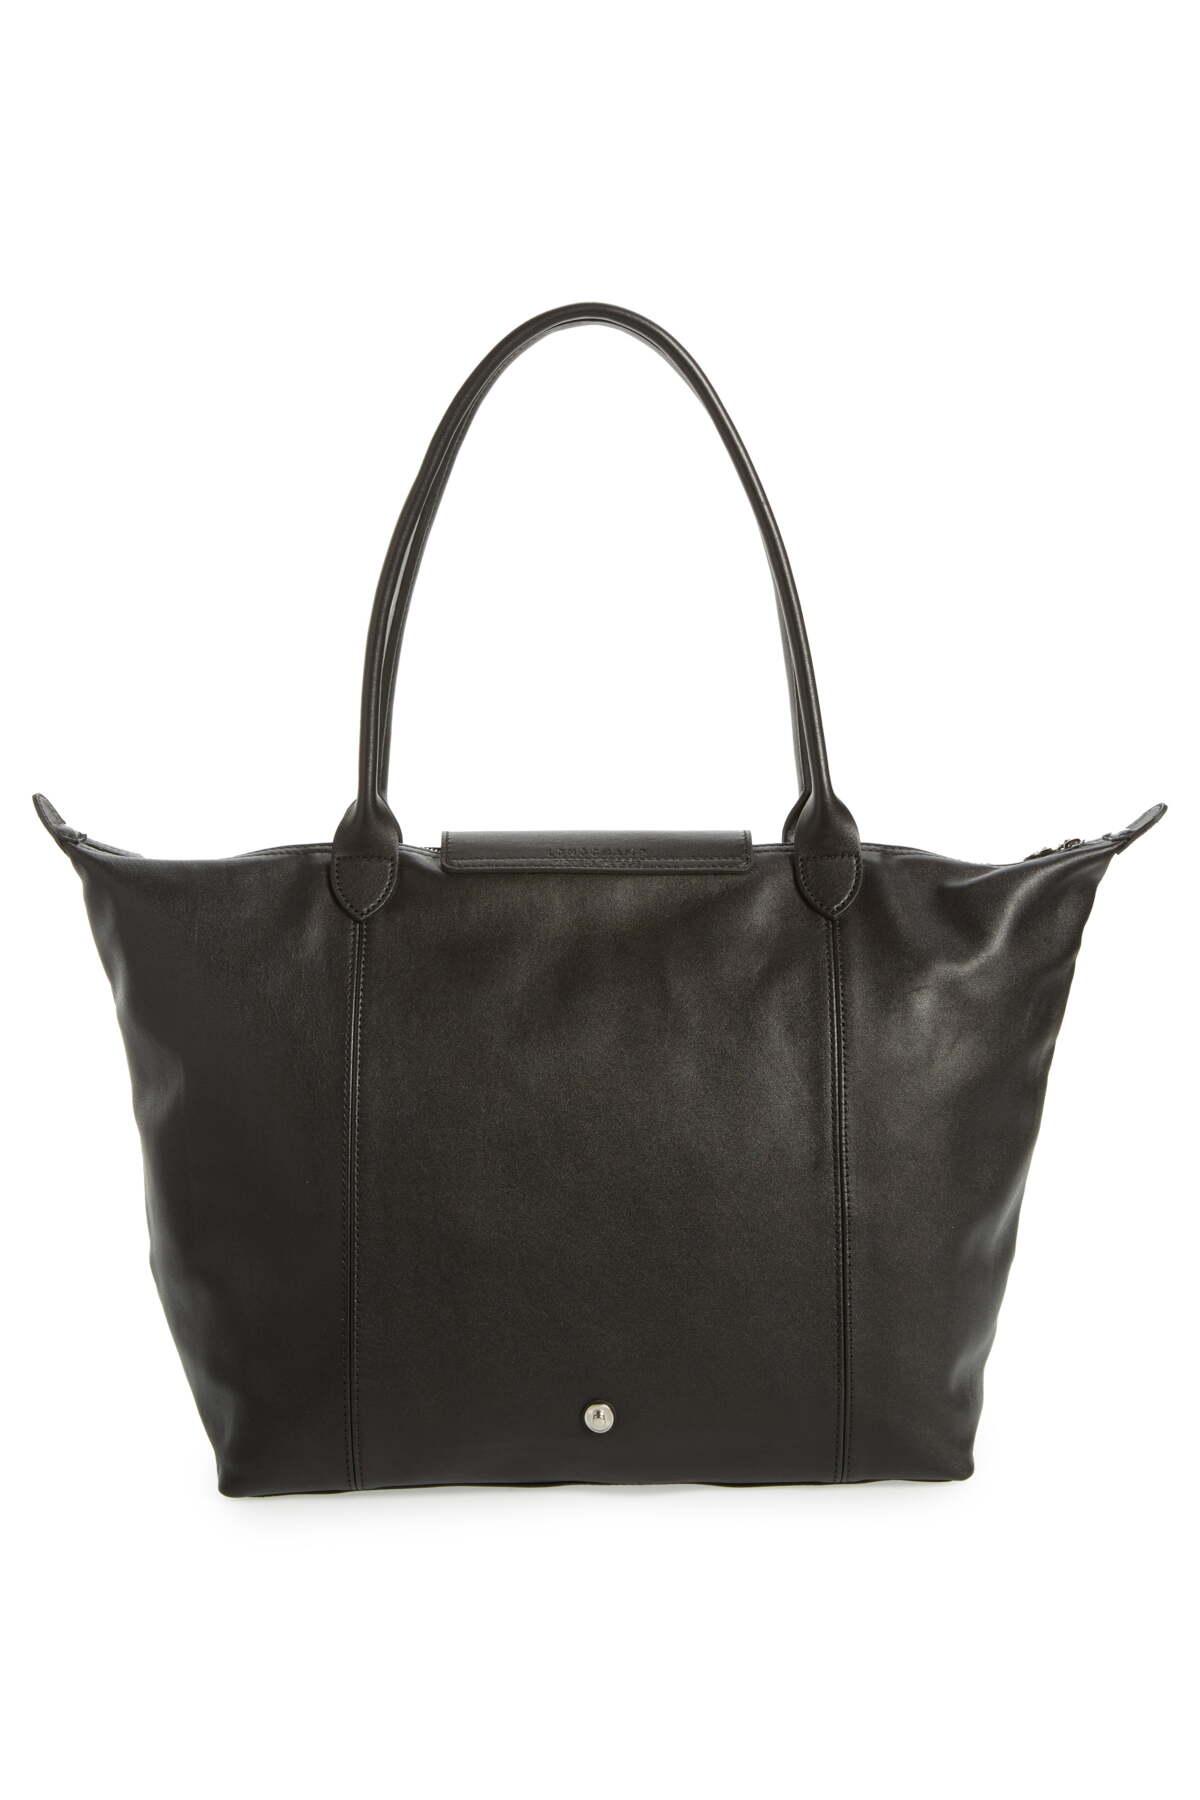 Longchamp 'le Pliage Cuir' Leather Tote in Black | Lyst